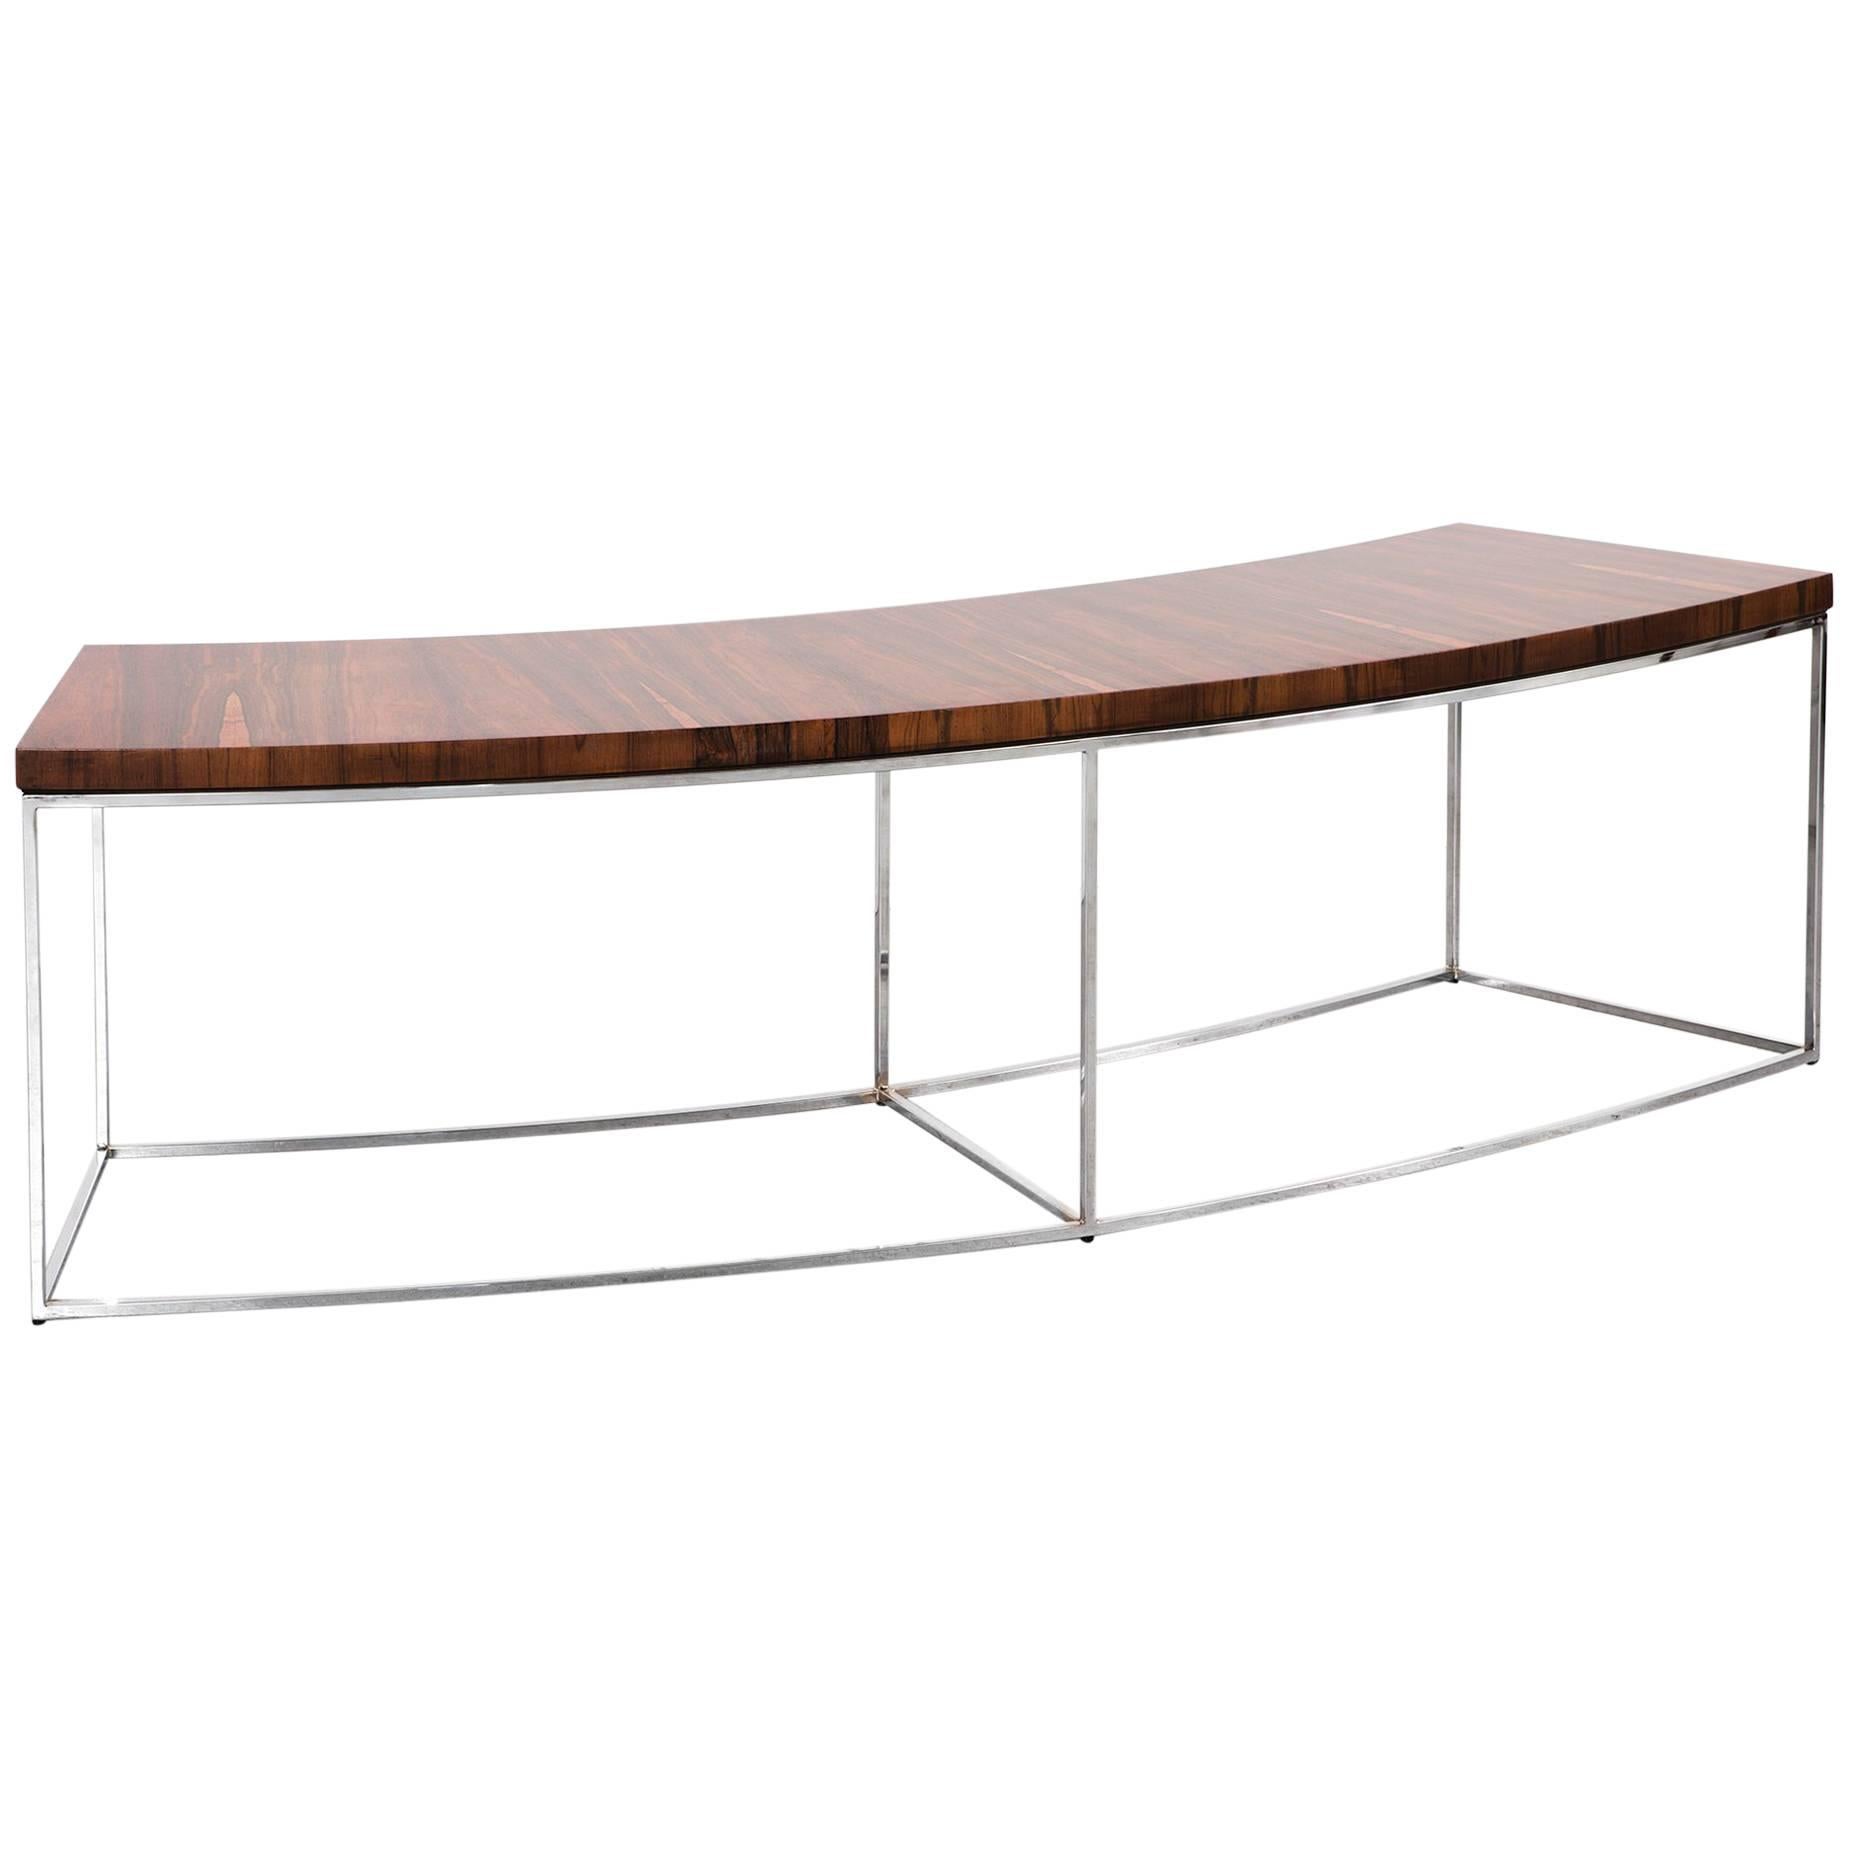 Milo Baughman Mid-Century Modern Rosewood Bench, Sofa Table For Sale